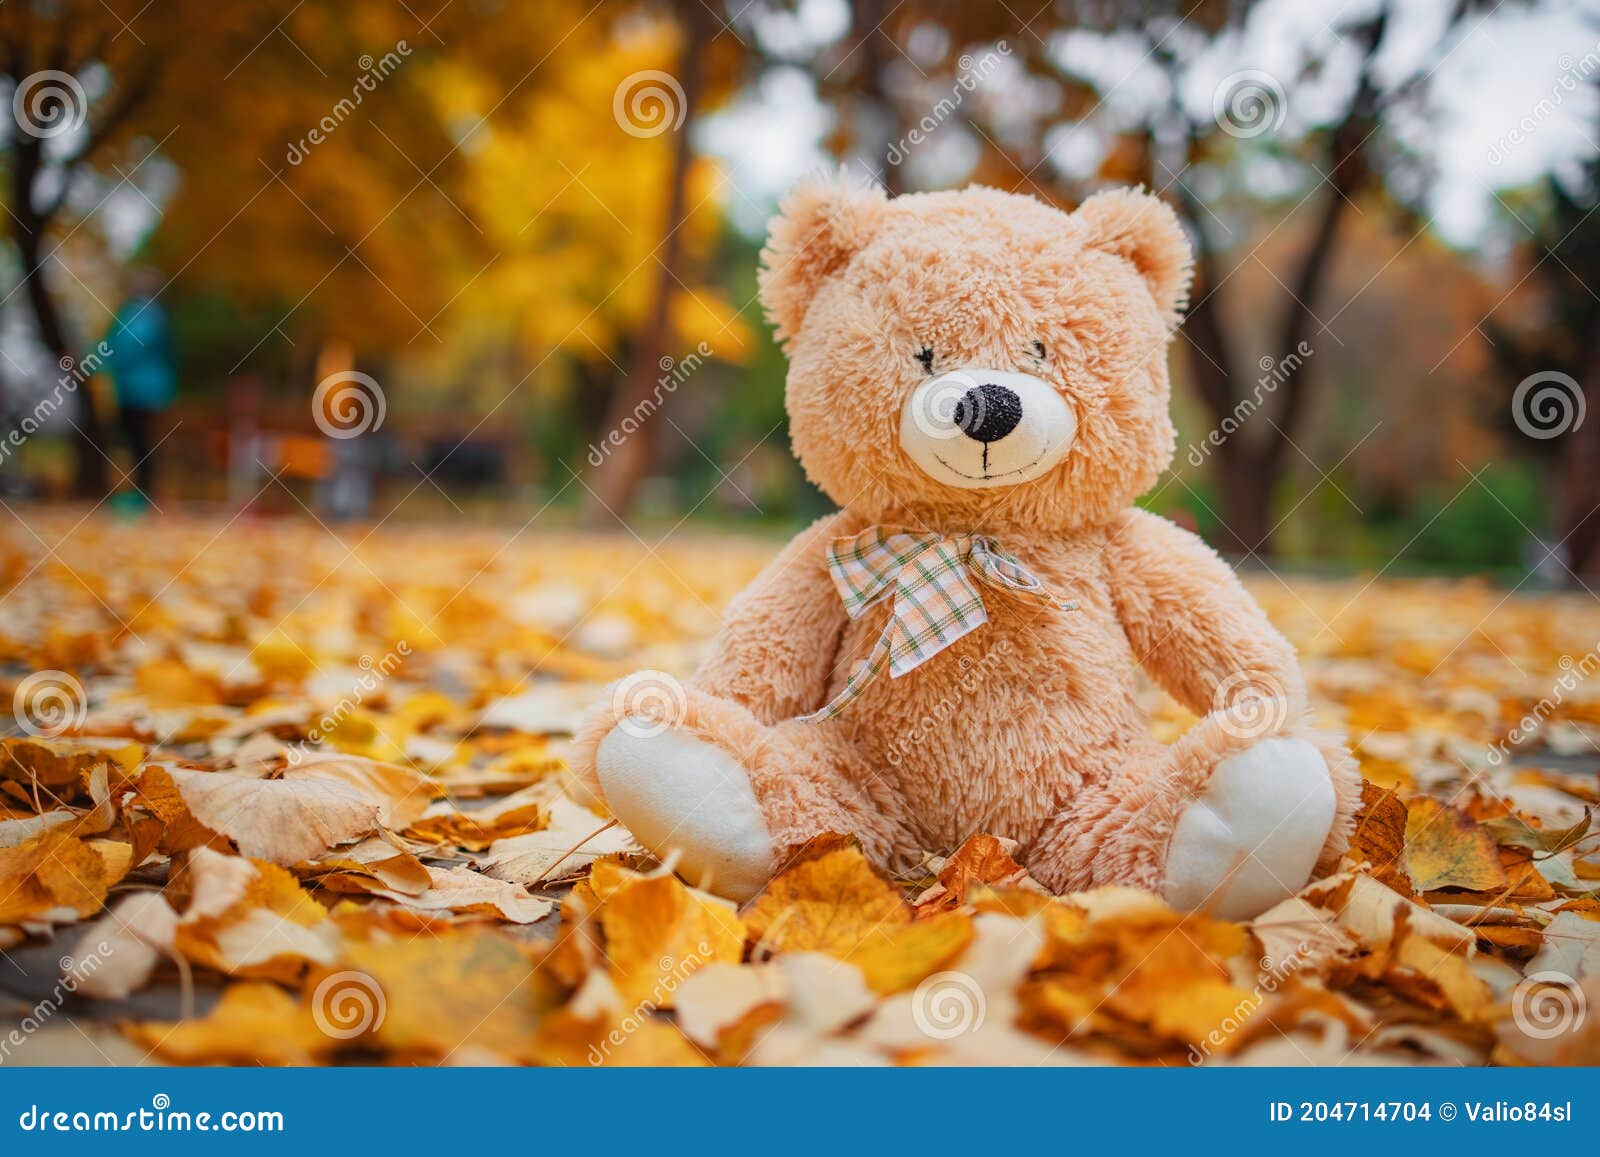 Teddy Bear Baby Toy Sitting in Fallen Colorful Leaves Outdoor. Autumn ...